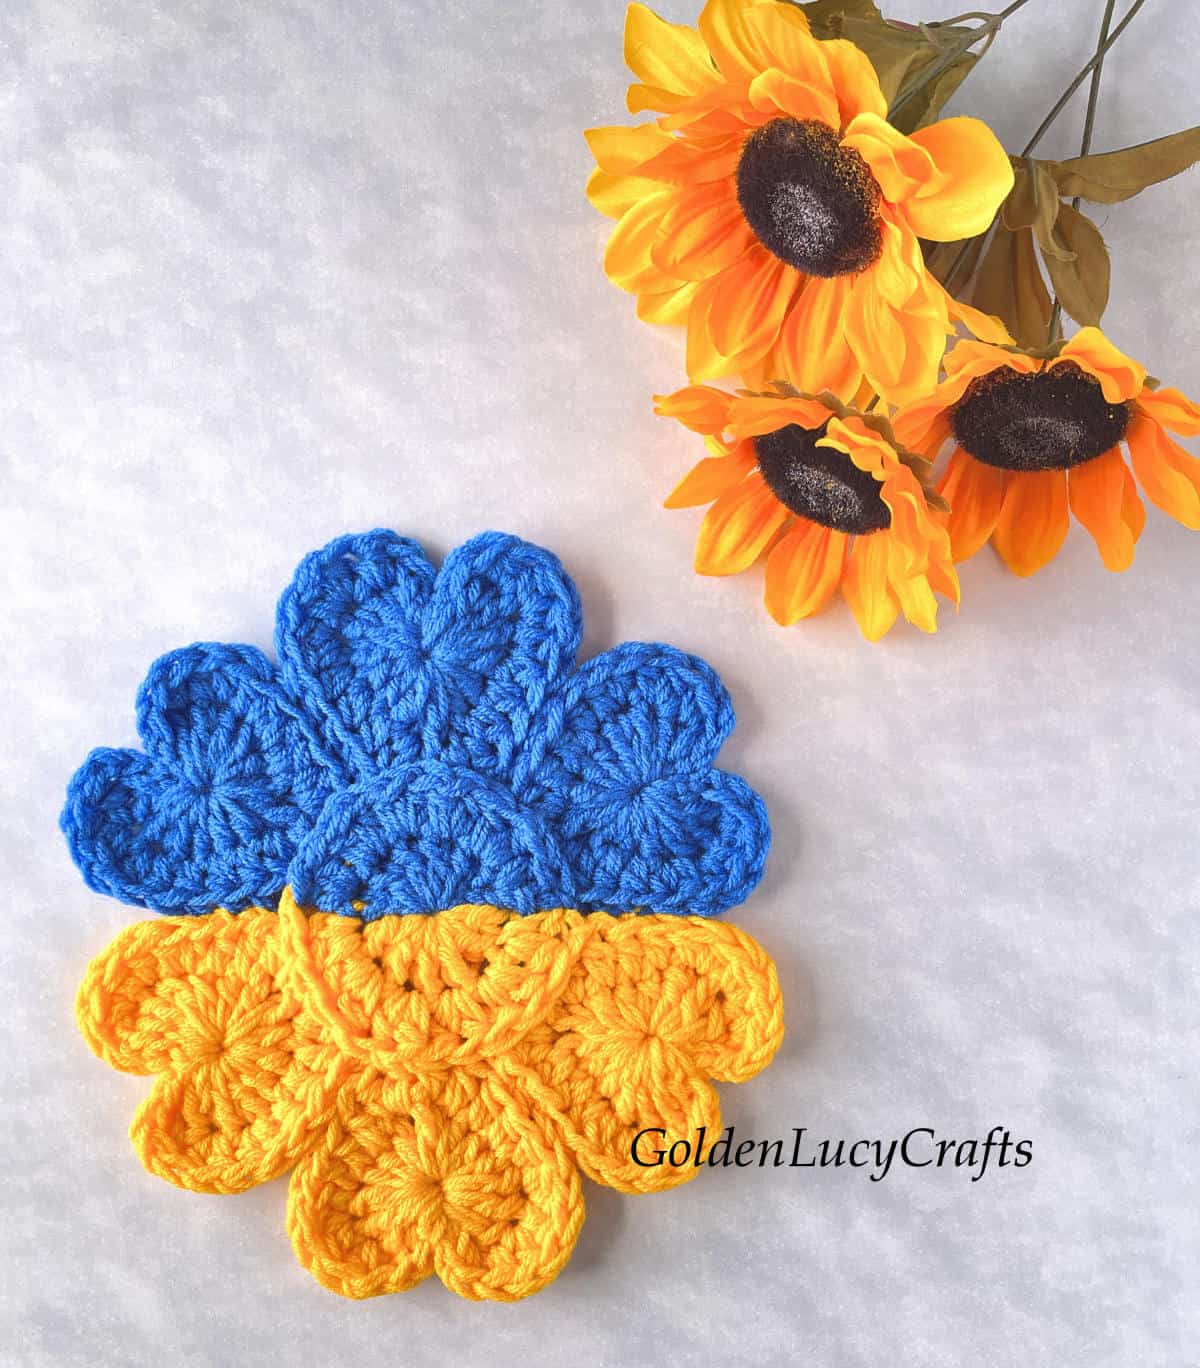 Crochet flower made in colors of Ukrainian flag, sunflowers in the background.